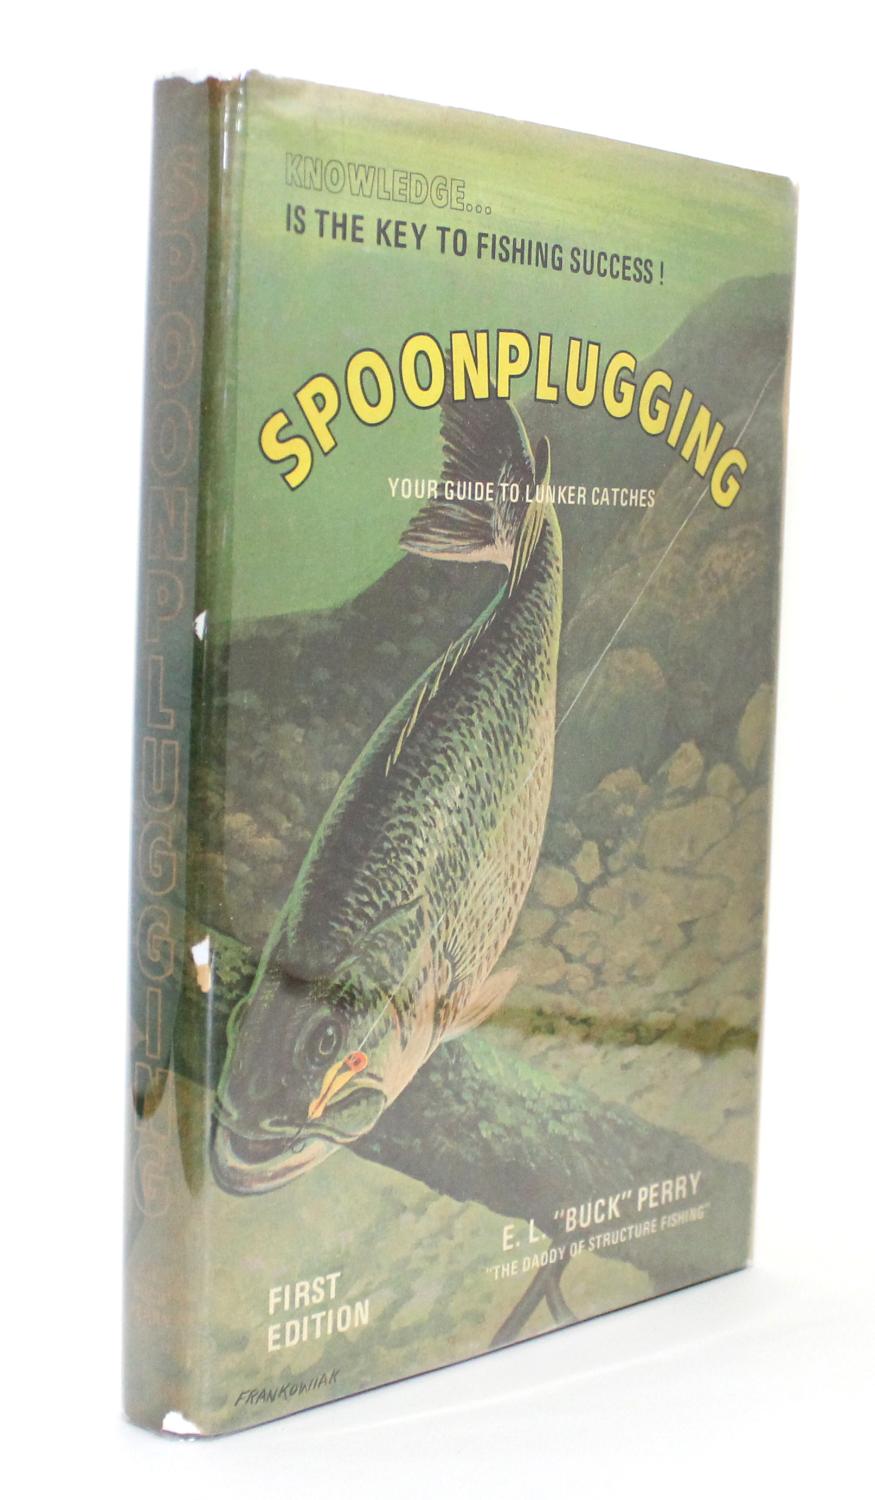 Spoonplugging: Your Guide to Lunker Catches by Elwood L. Buck Perry: Good  Soft cover 1st Edition, Signed by Author(s)